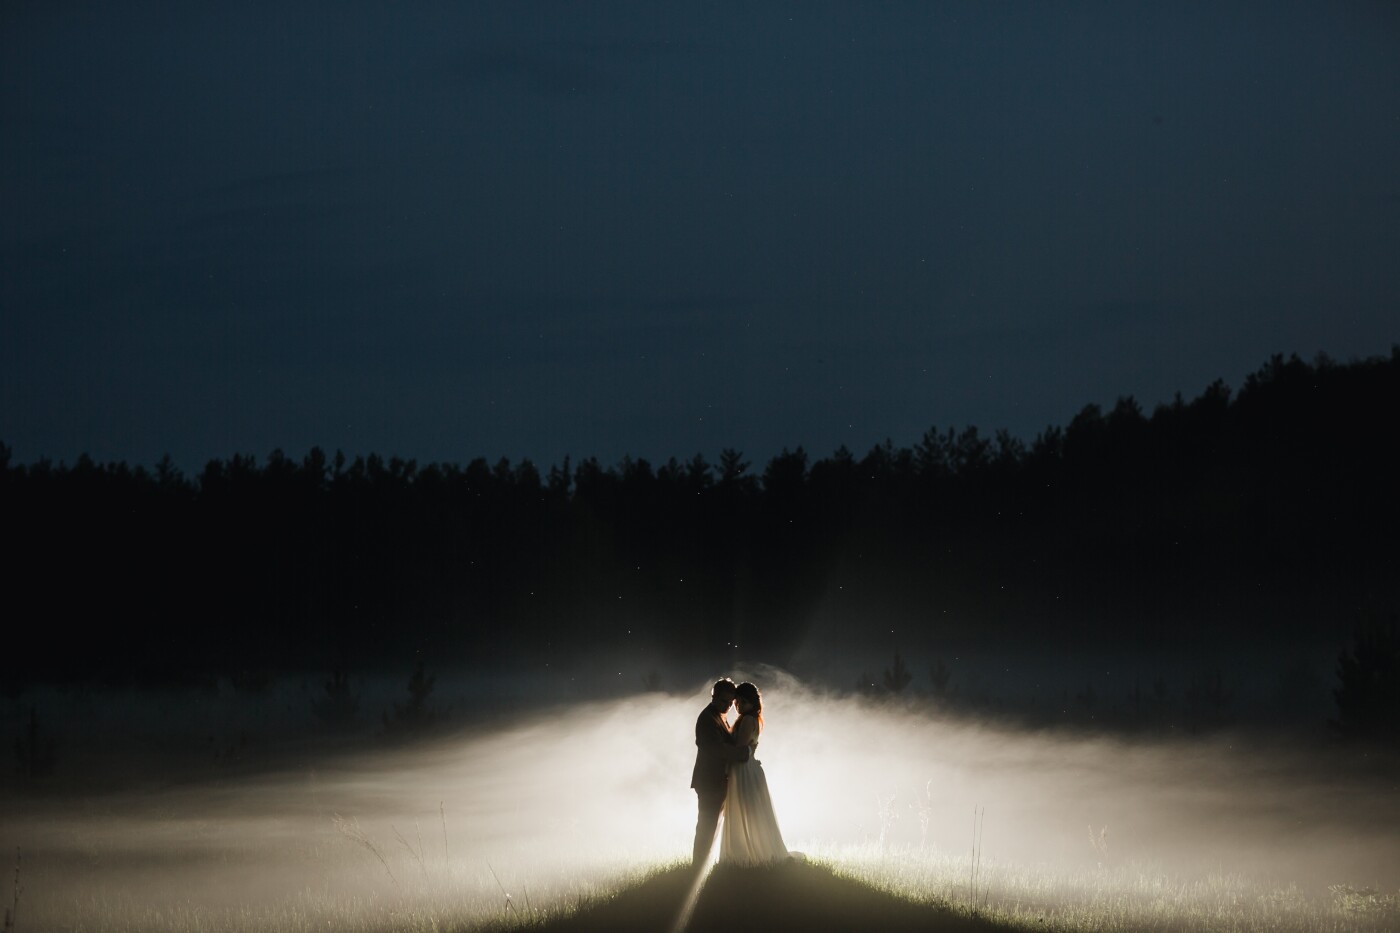 When we went to the ceremony, there was a fog and we decided to use it , so we quickly run to it , I put flash and made that's a beautiful picture.